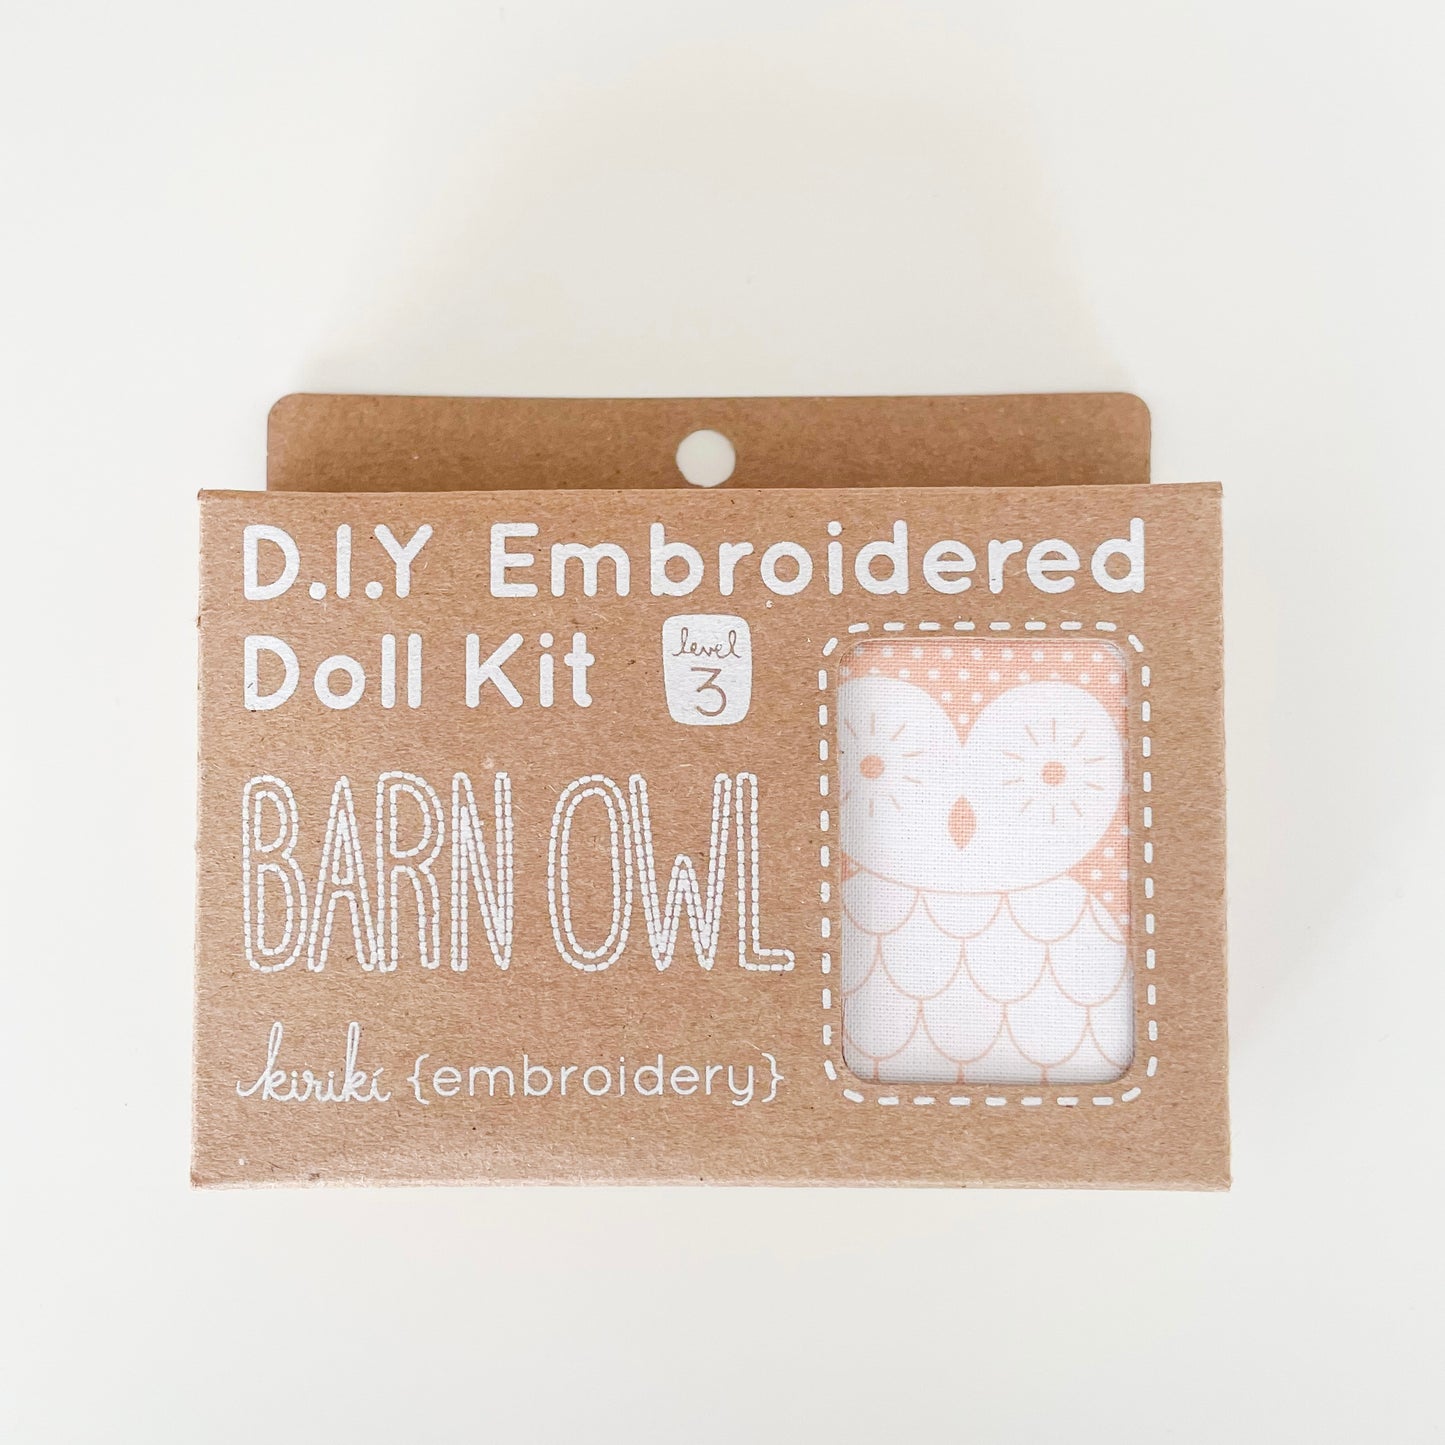 Embroidered Doll Kit - Barn Owl Level 3